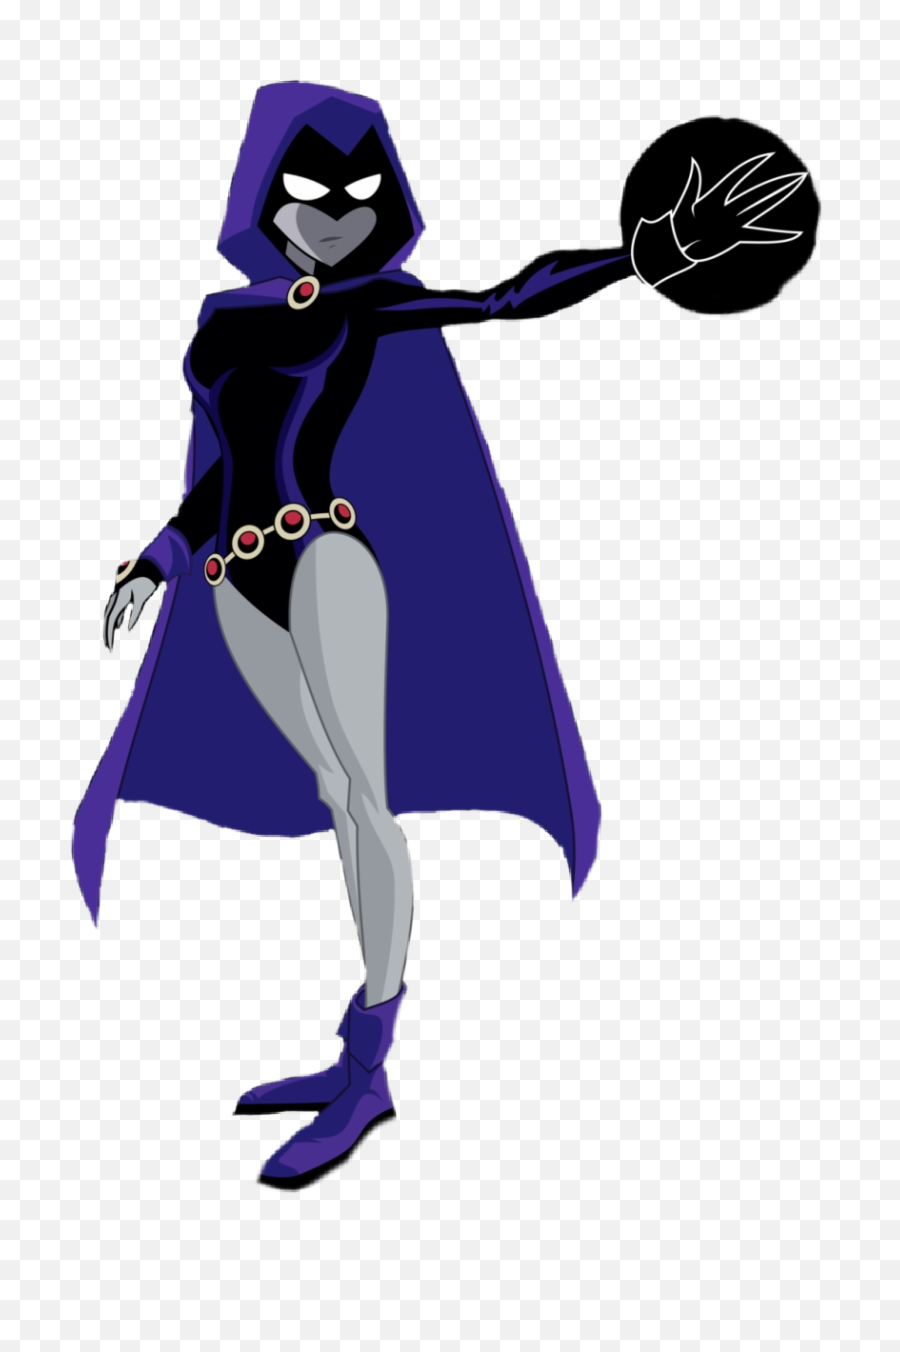 The Most Edited Rachelroth Picsart - Raven From Teen Titans Png,Raven Teen Titans Icon